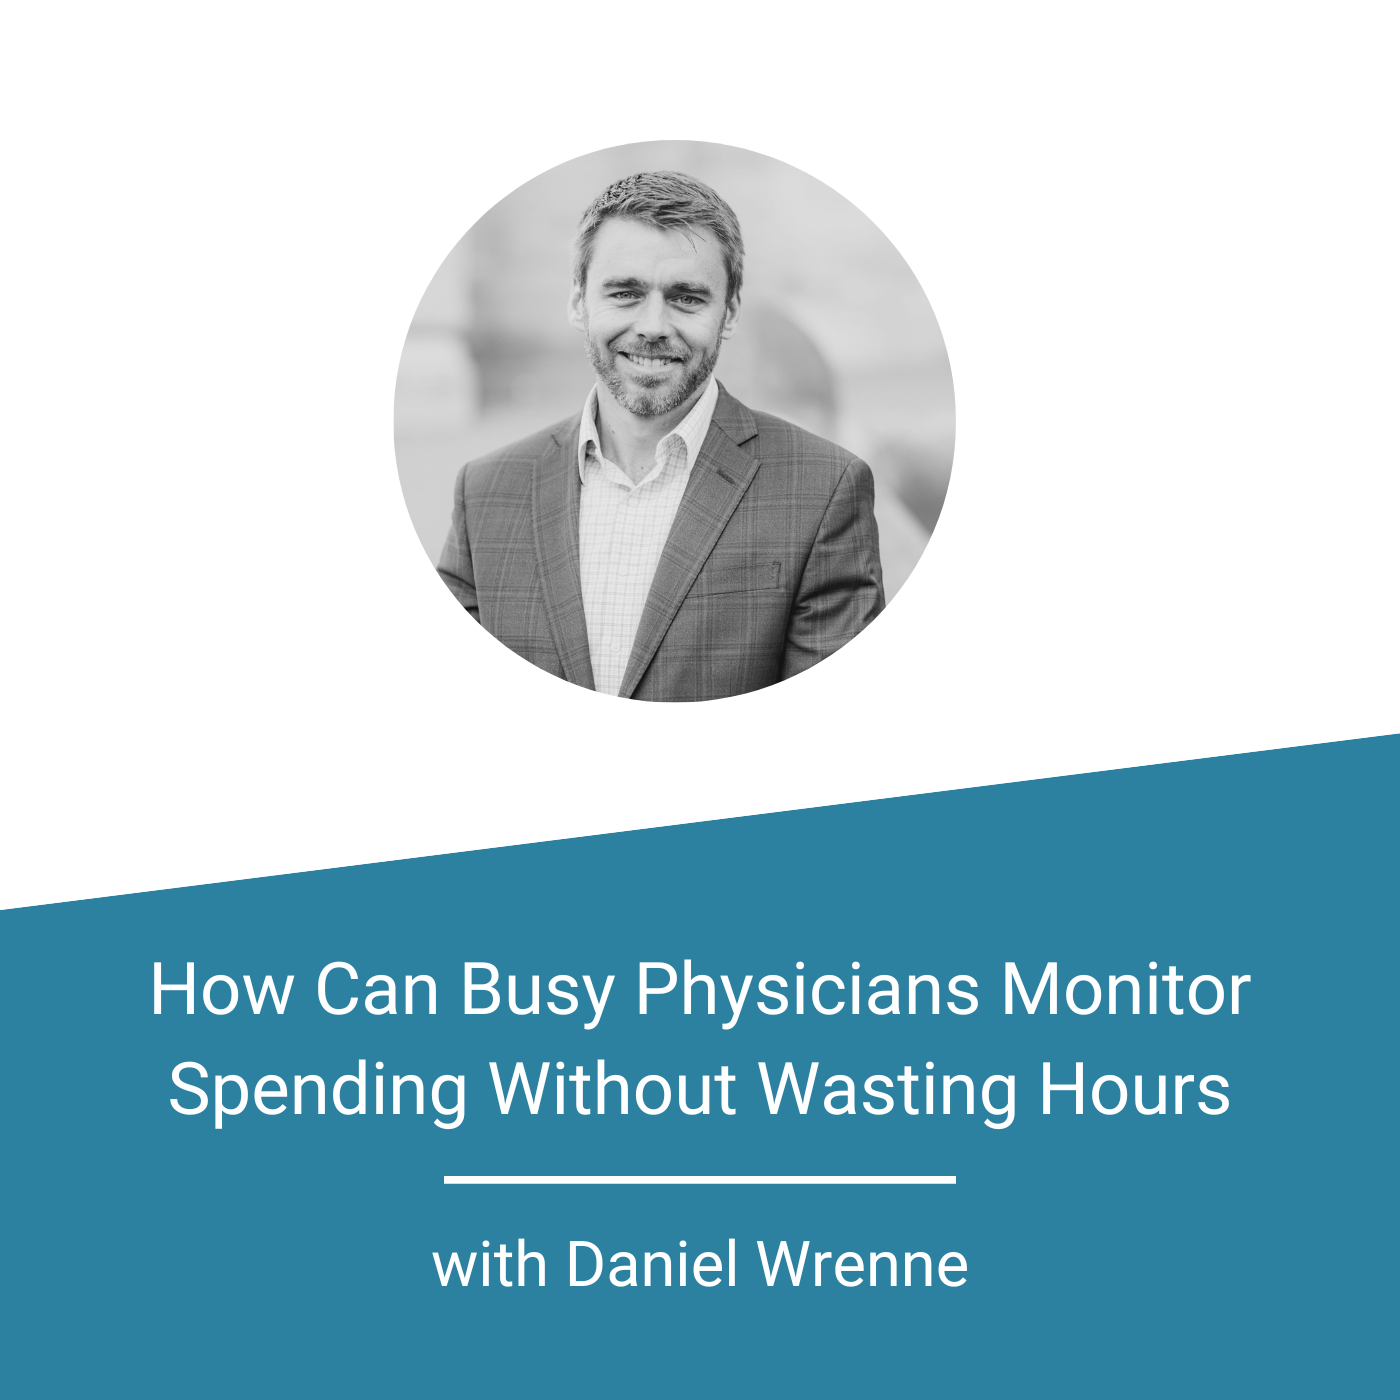 How Can Busy Physicians Monitor Spending Without Wasting Hours